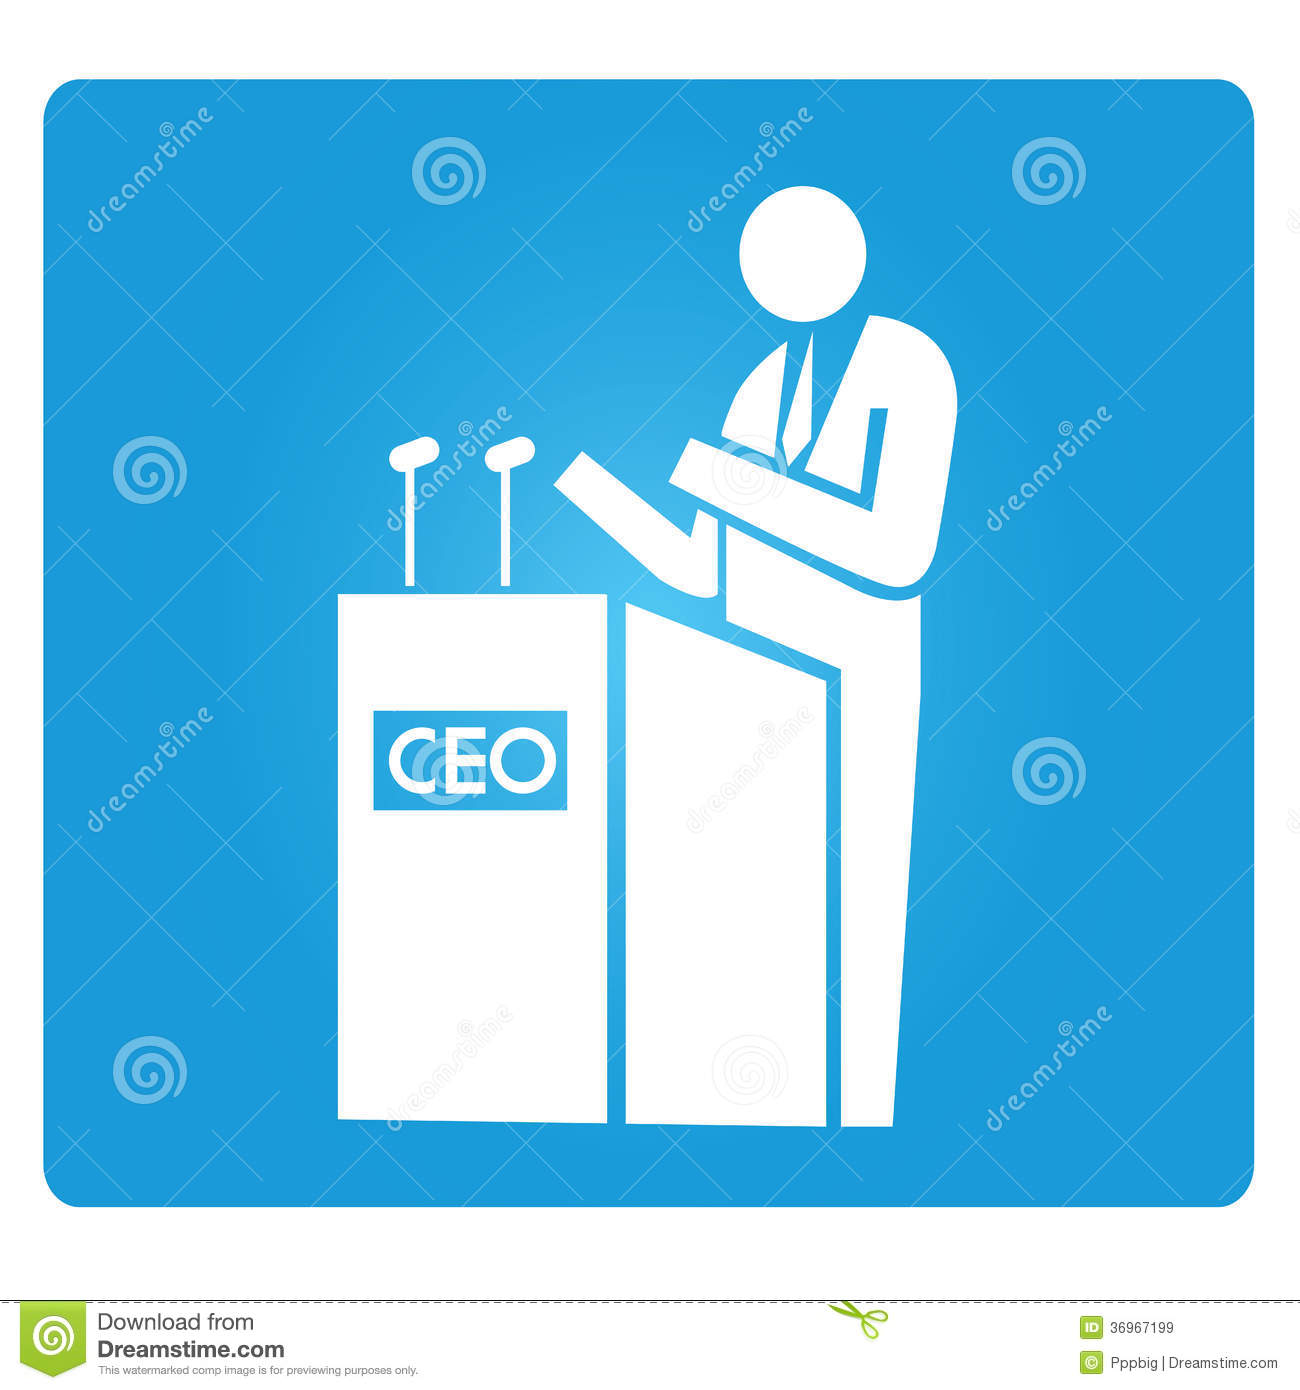 Ceo Chief Executive Officer Royalty Free Stock Images   Image